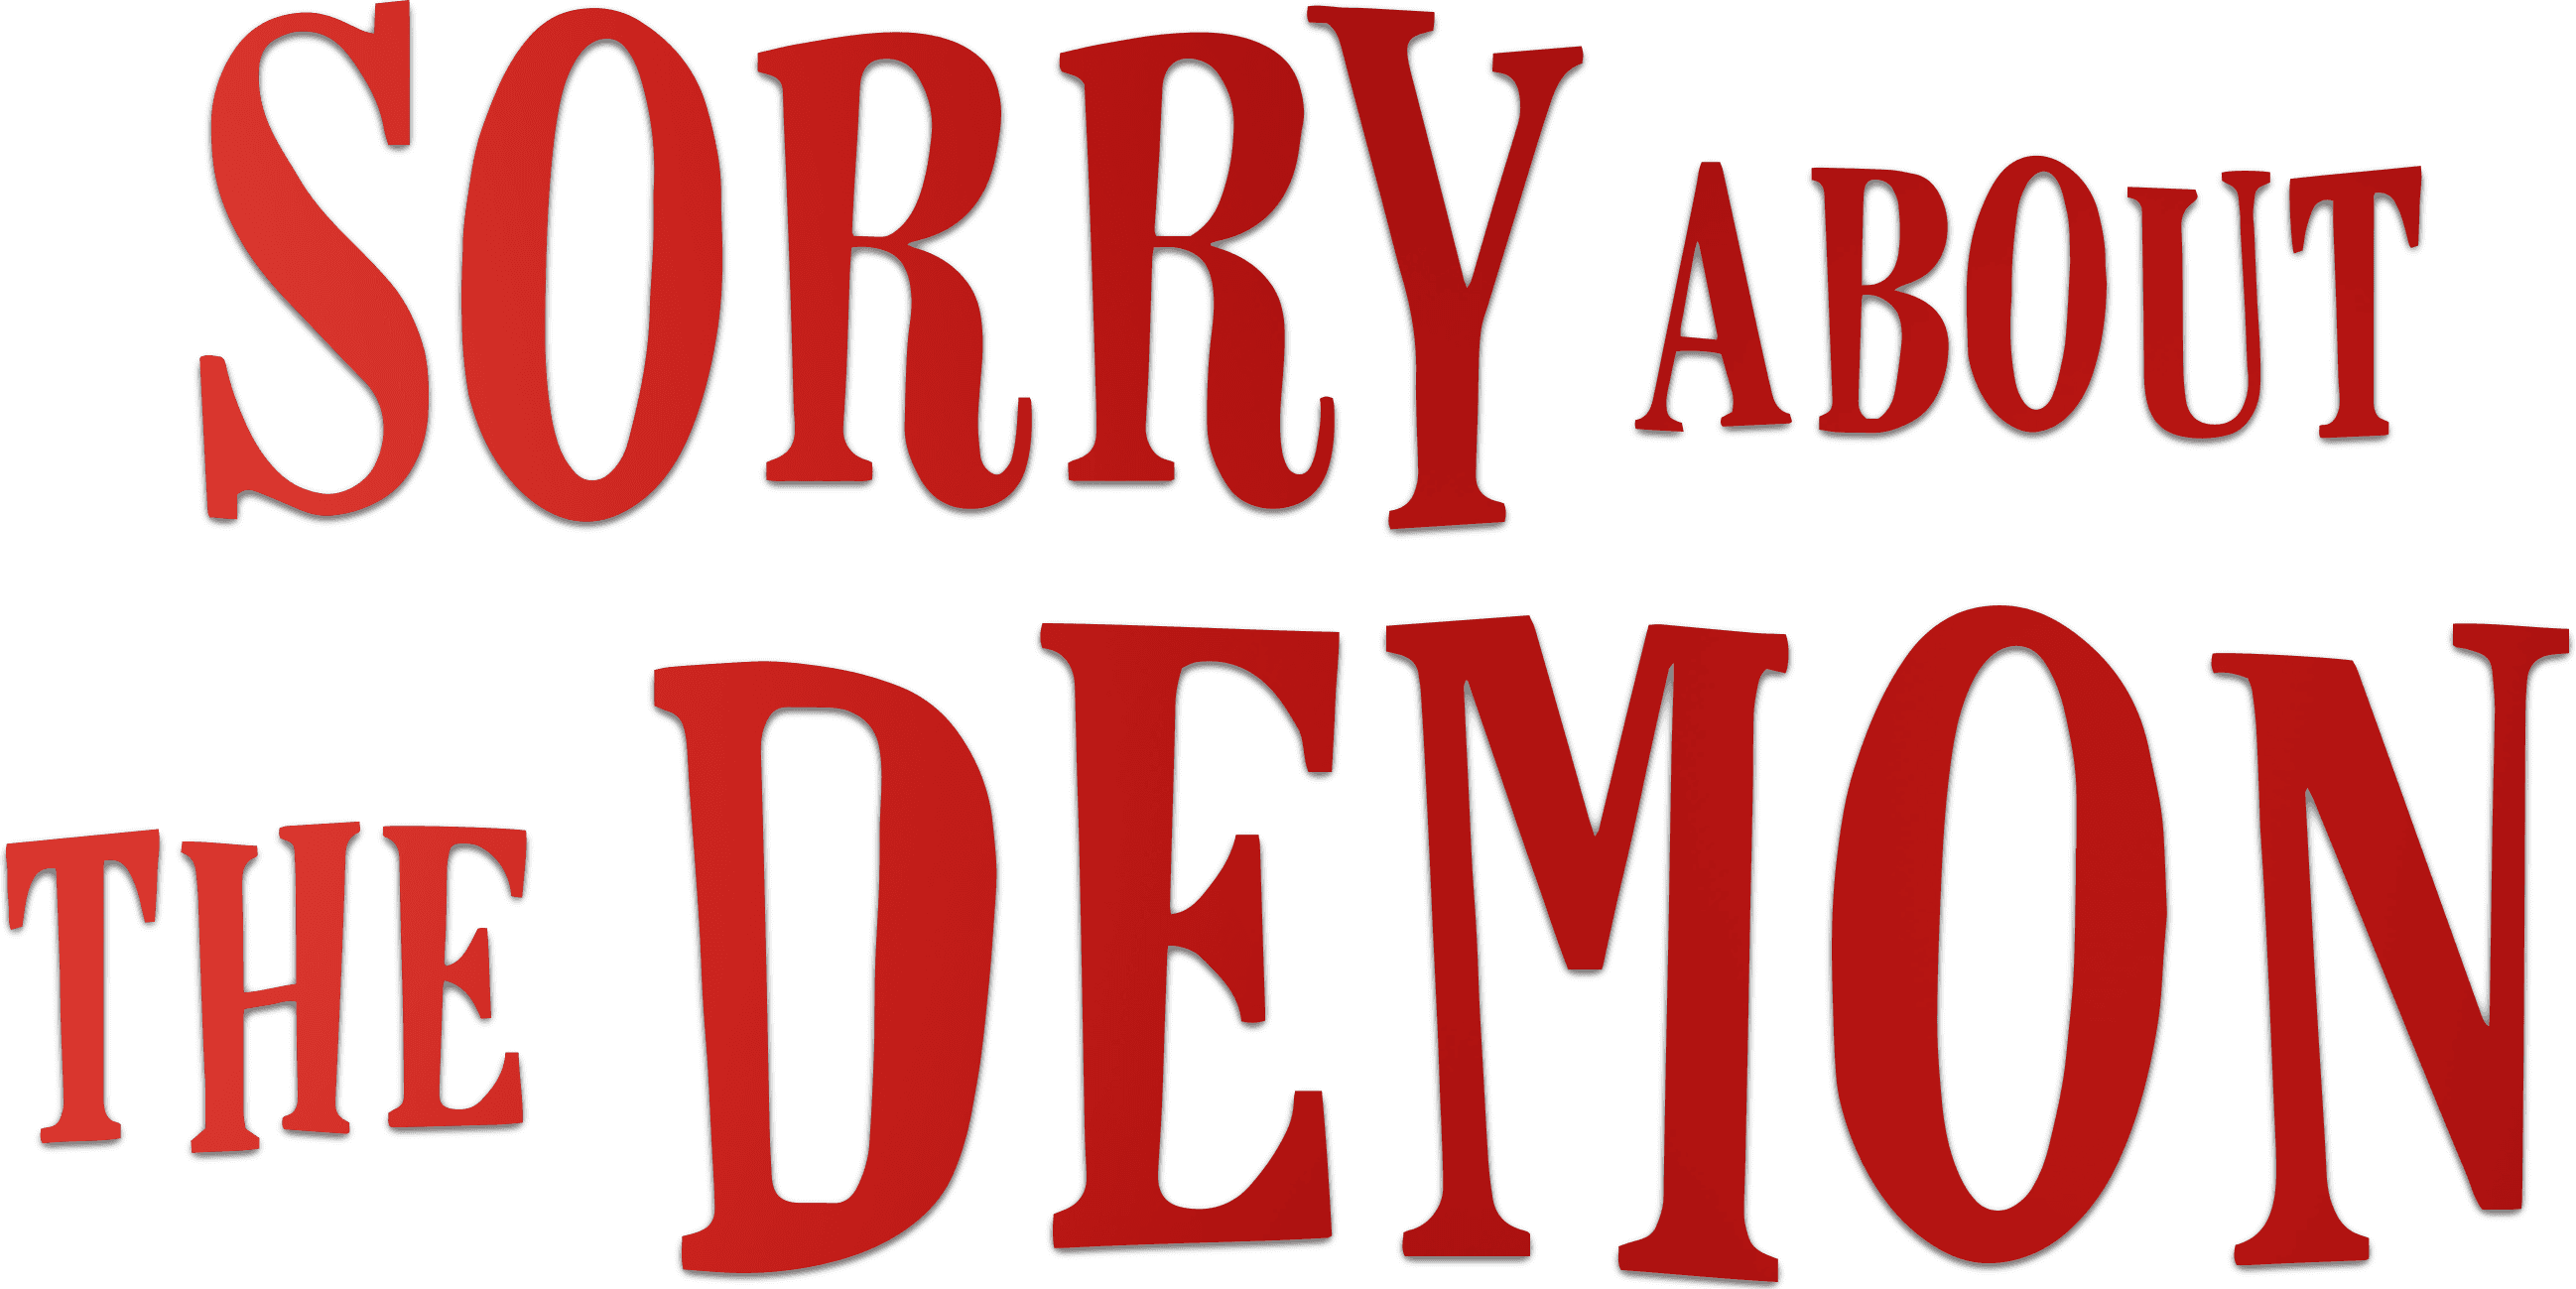 Sorry About the Demon logo